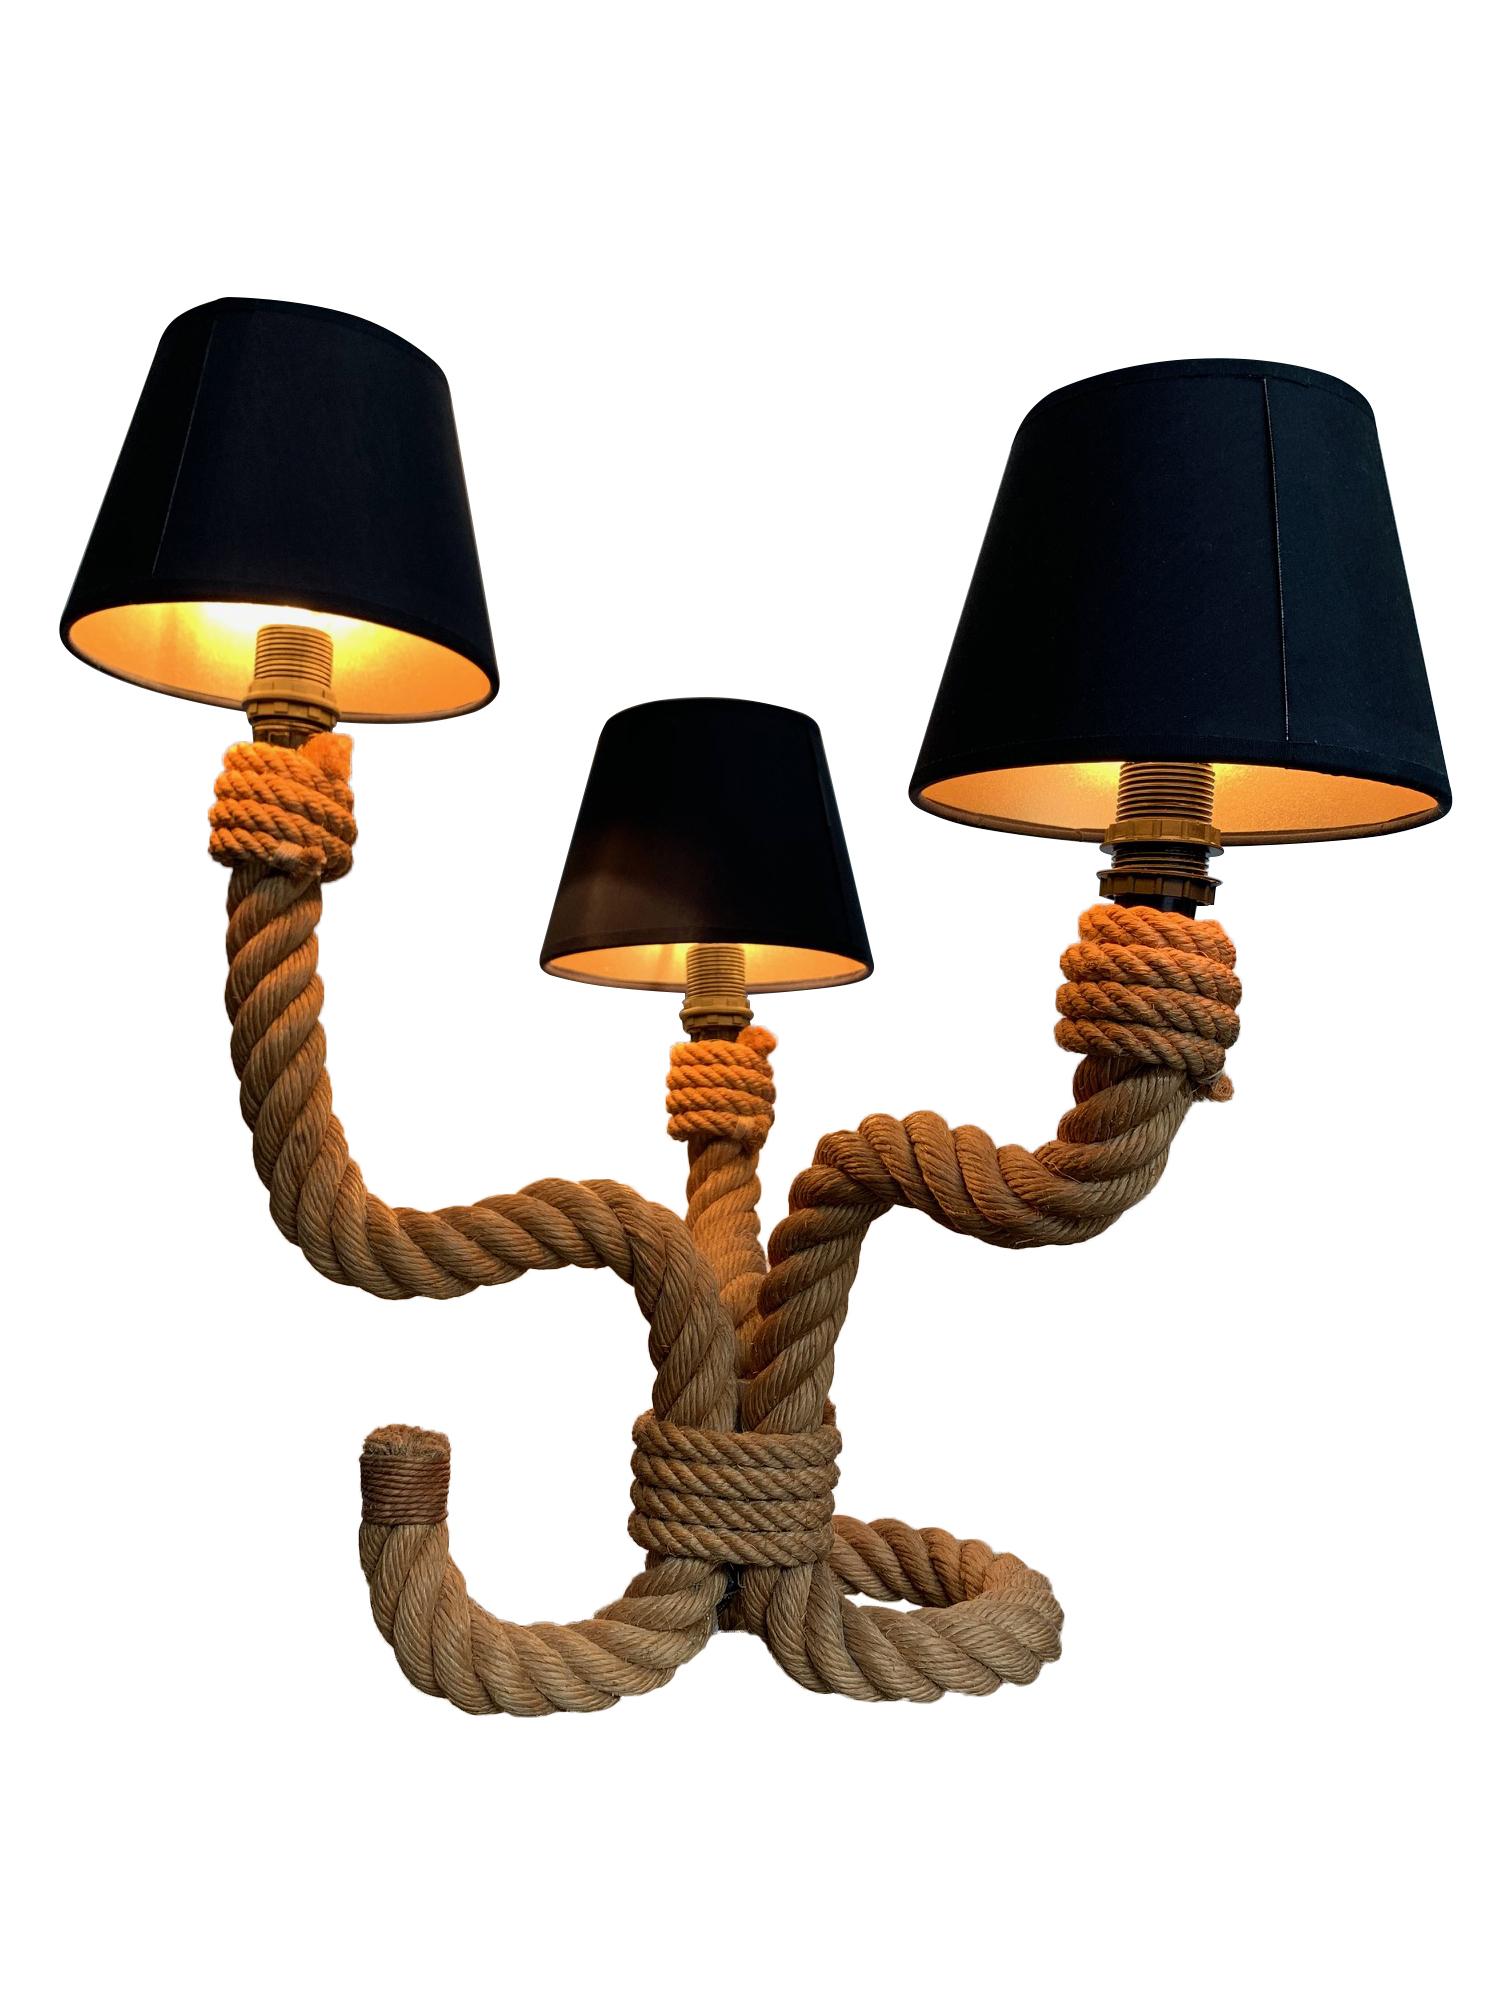 Mid-20th Century 1950s French Riviera Rope Table Lamp by Adrien Audoux and Frida Minet